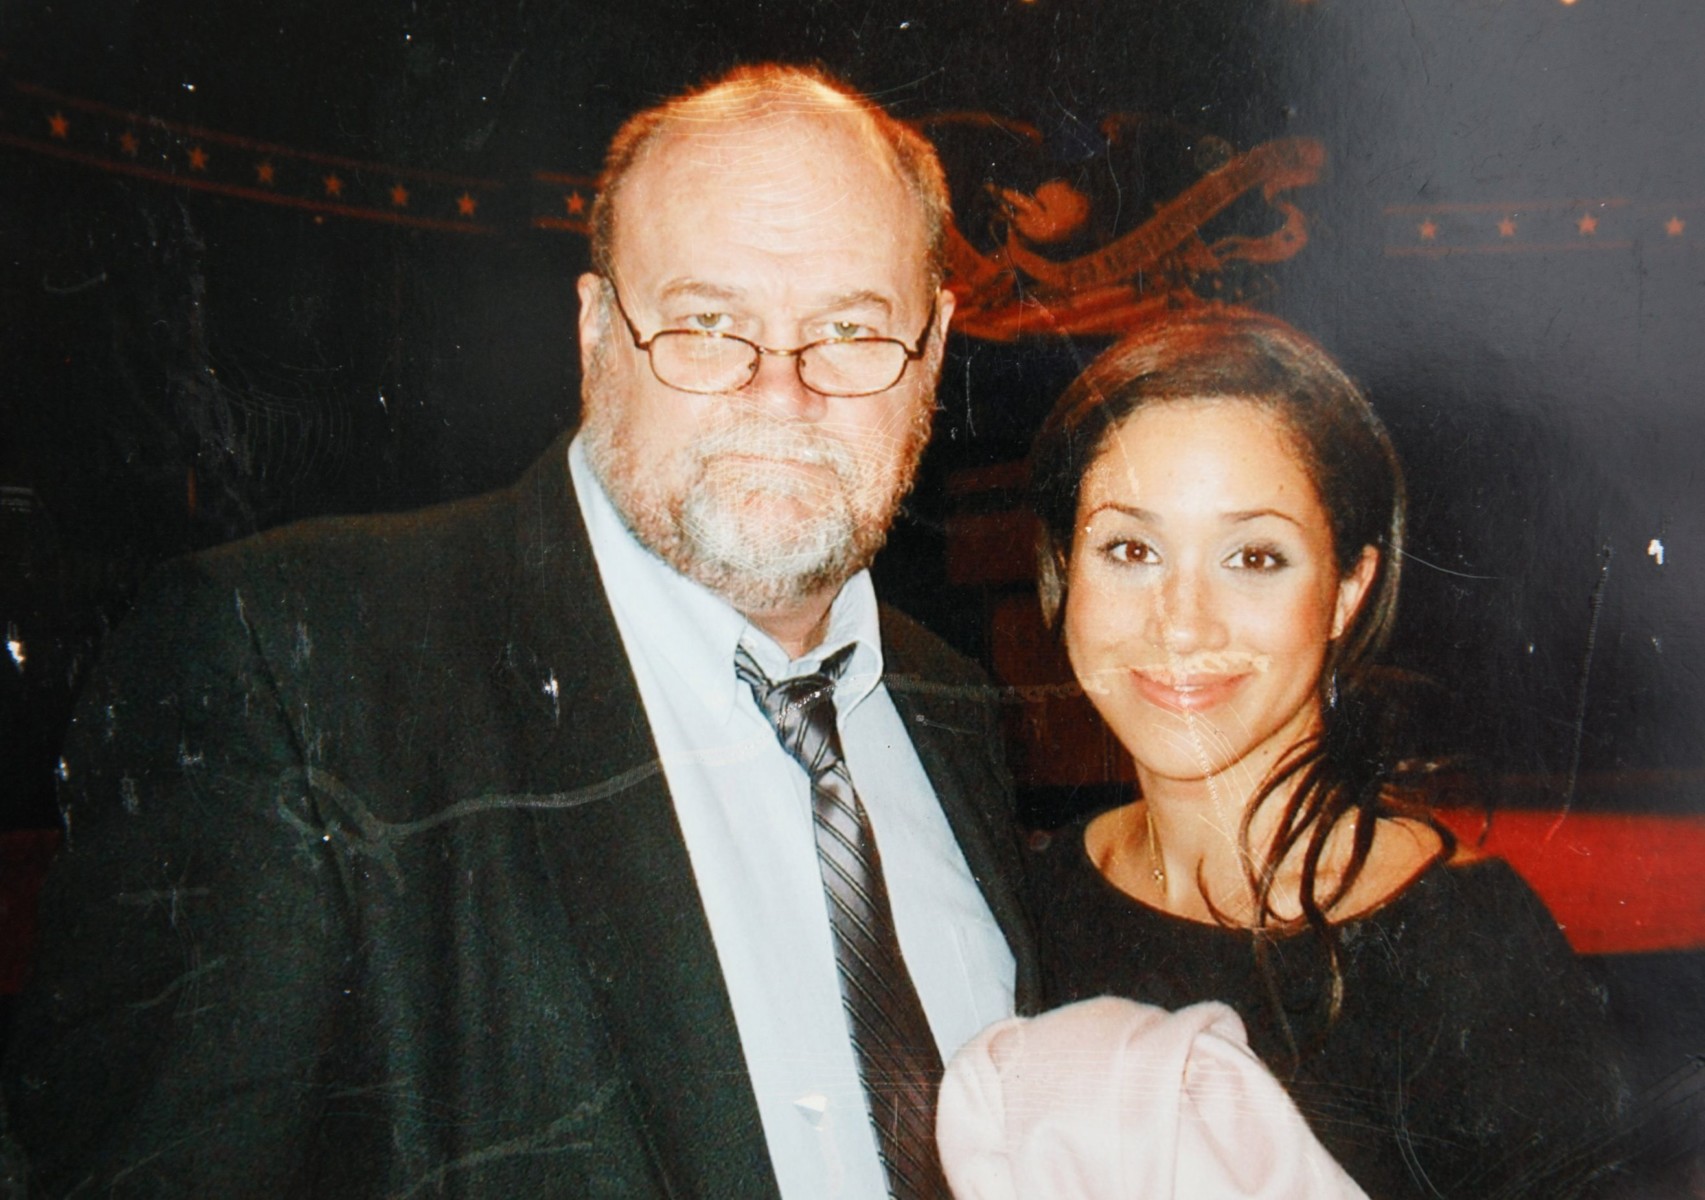 Thomas Markle says Meghan and Harry have abandoned the Queen, just as they did to him